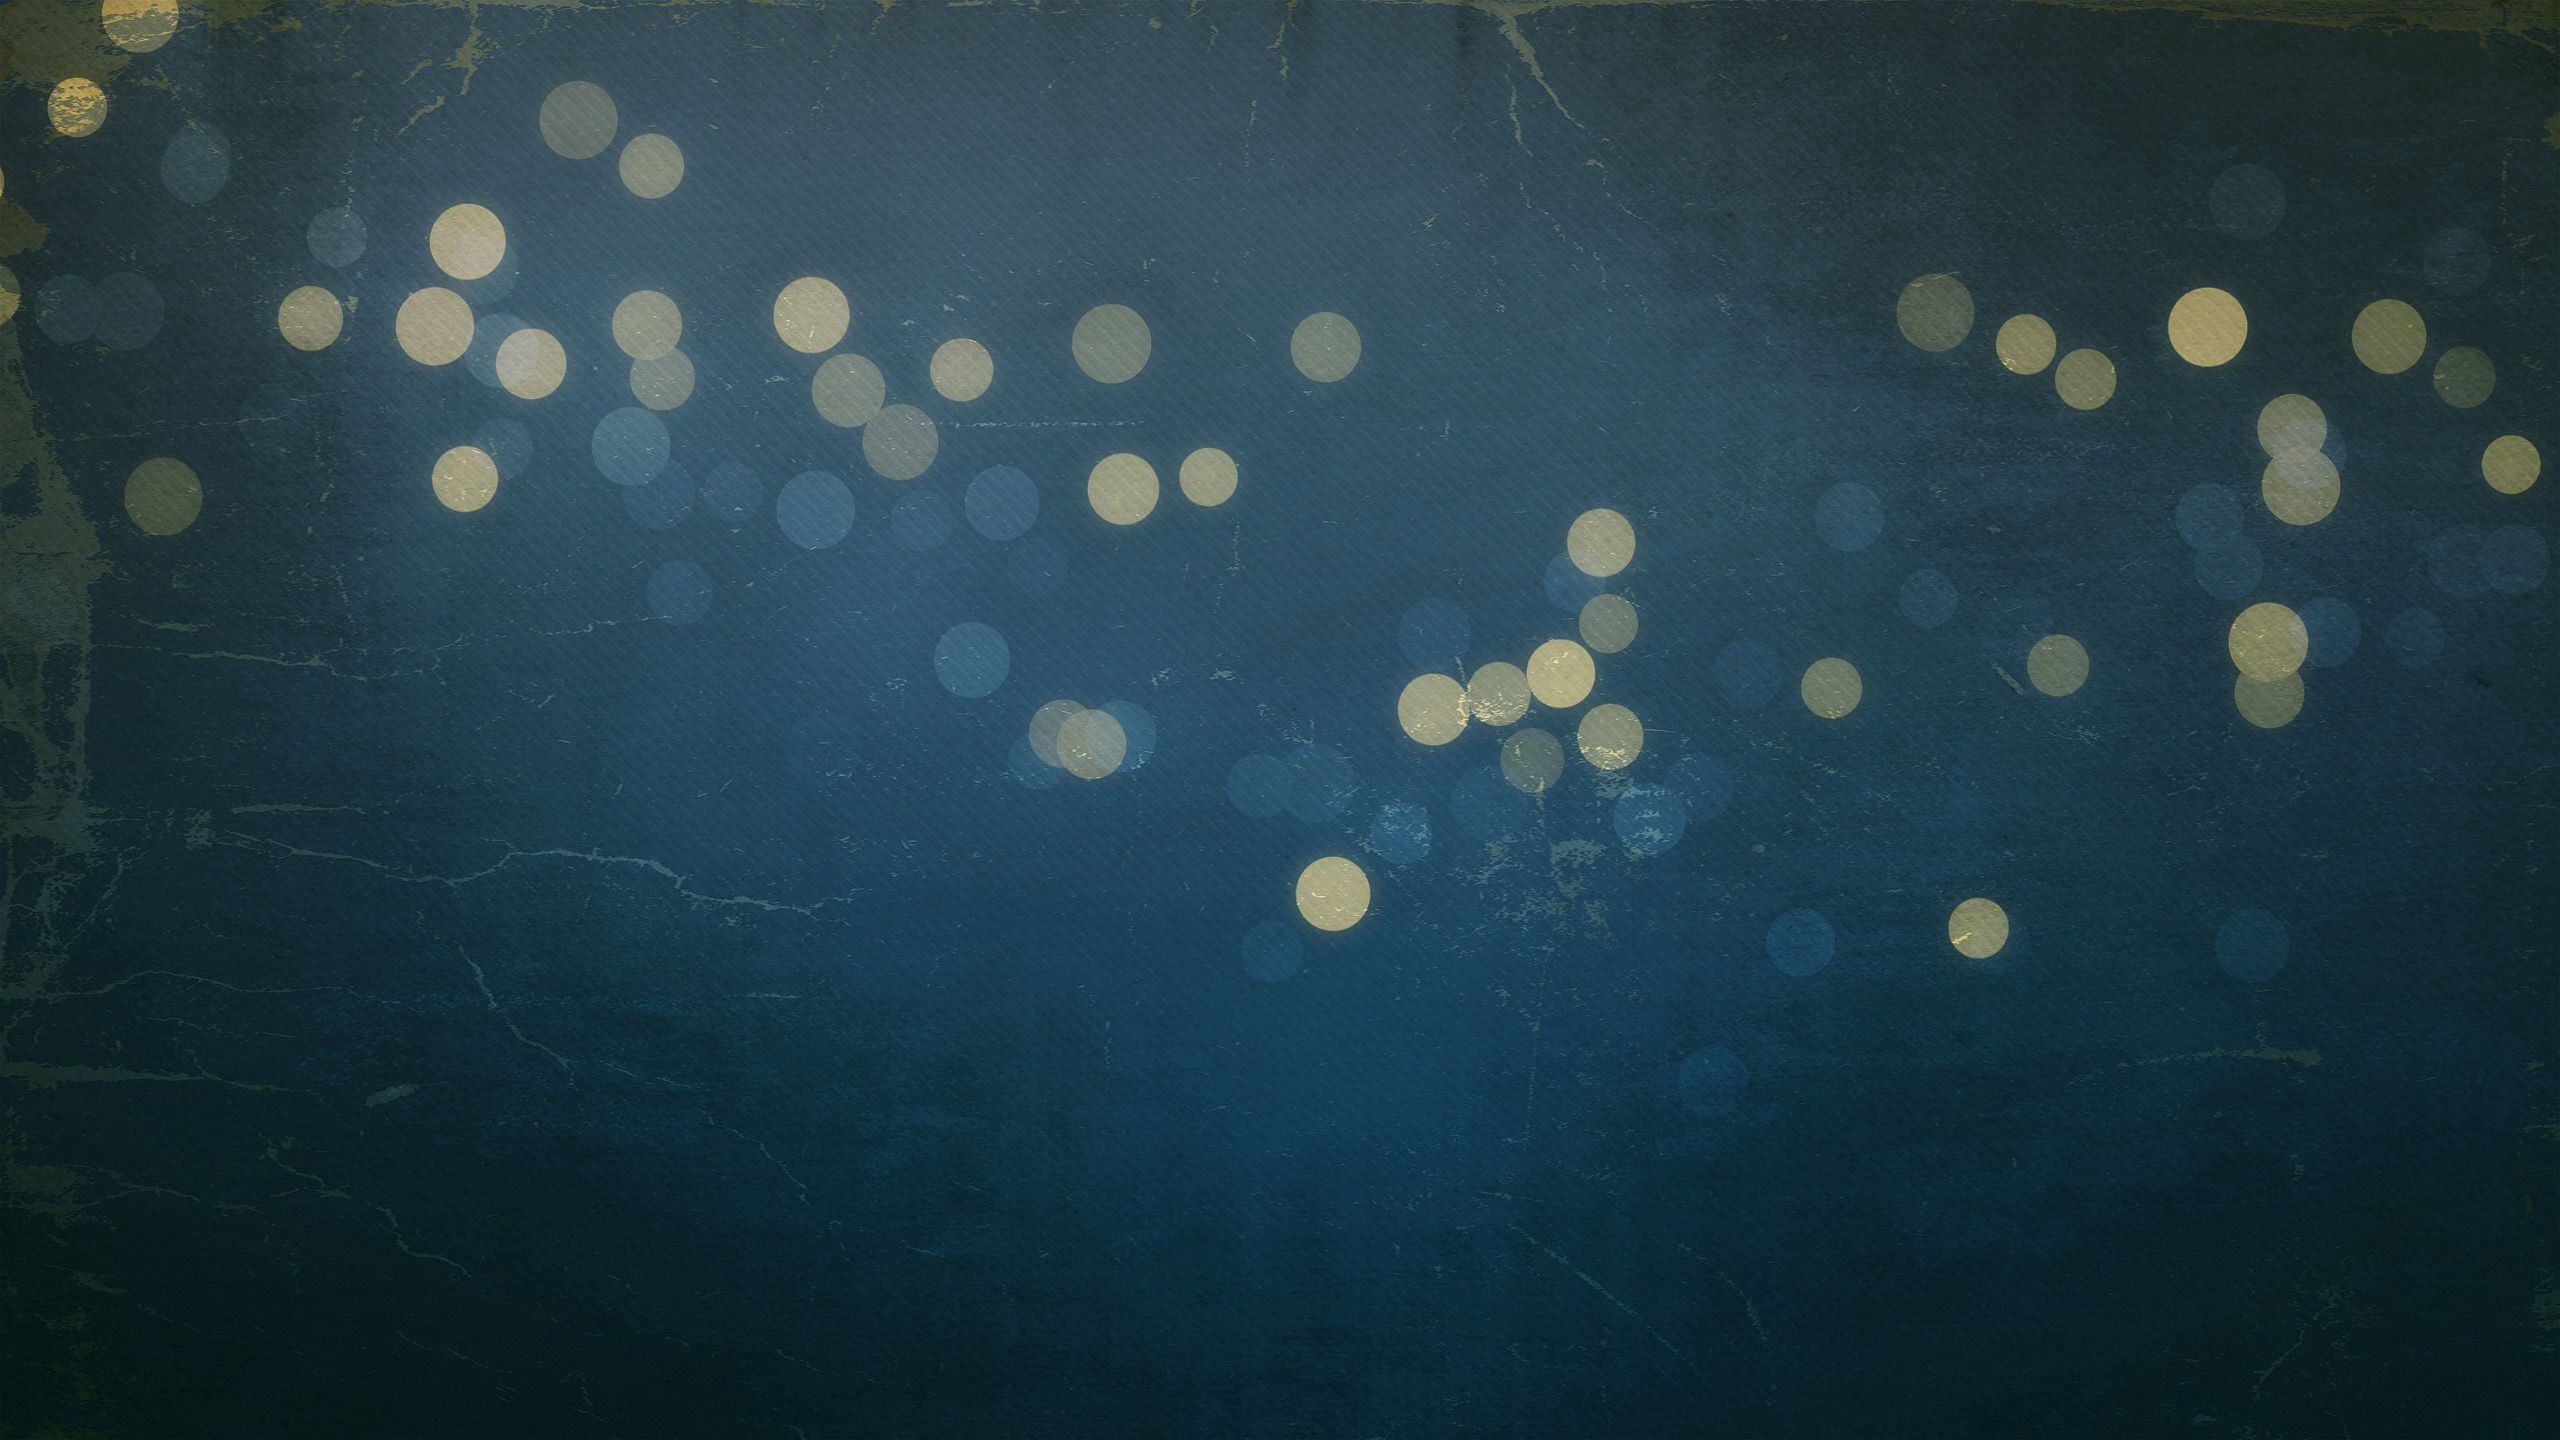 Full HD Wallpaper textures, spots, background, glare, circles, texture, stains